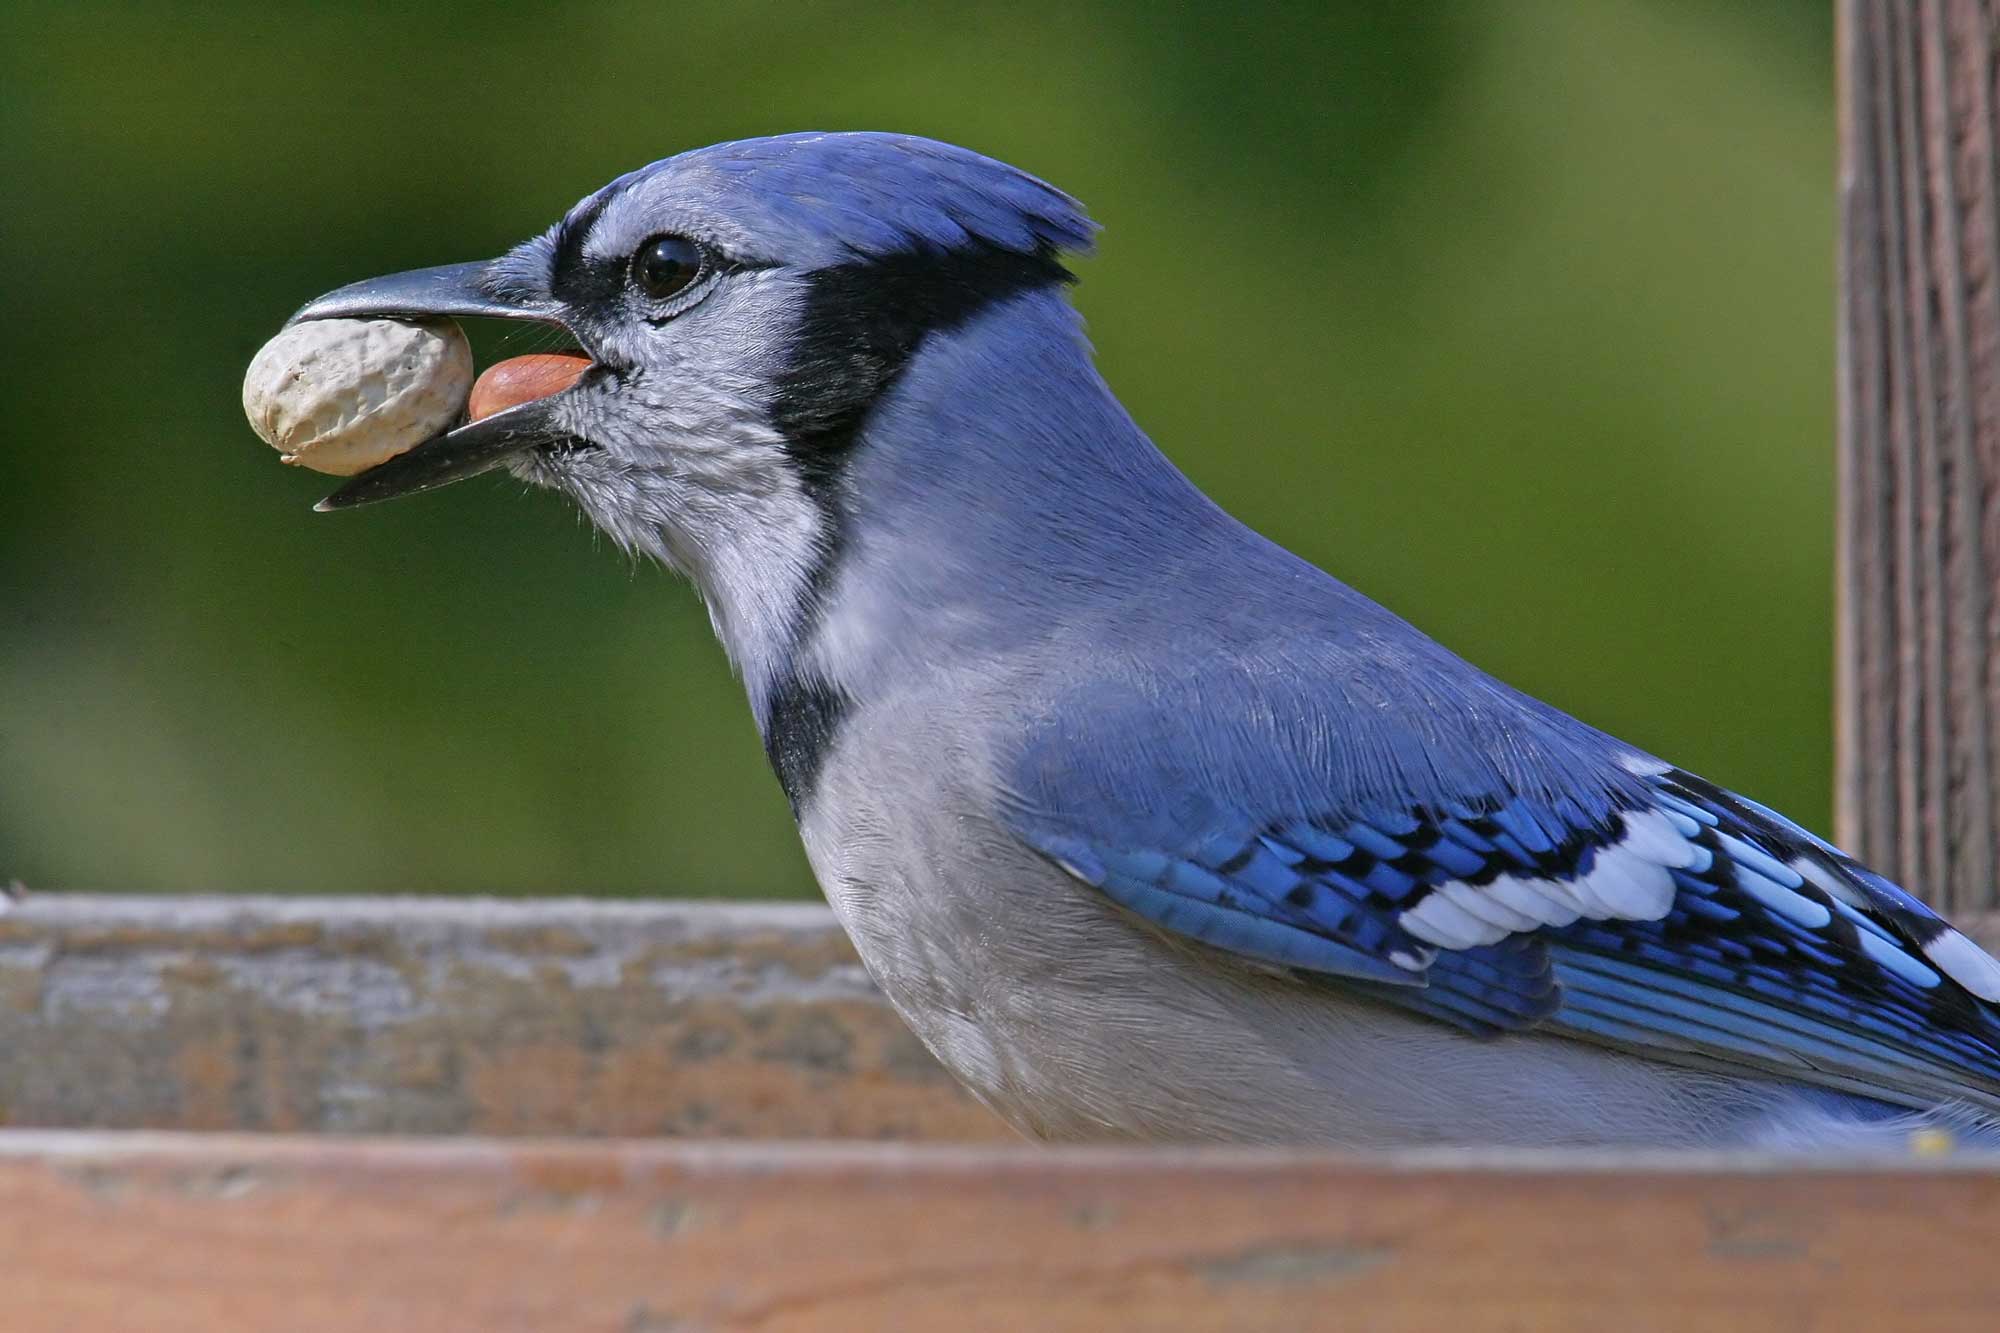 A blue jay with a nut in its mouth